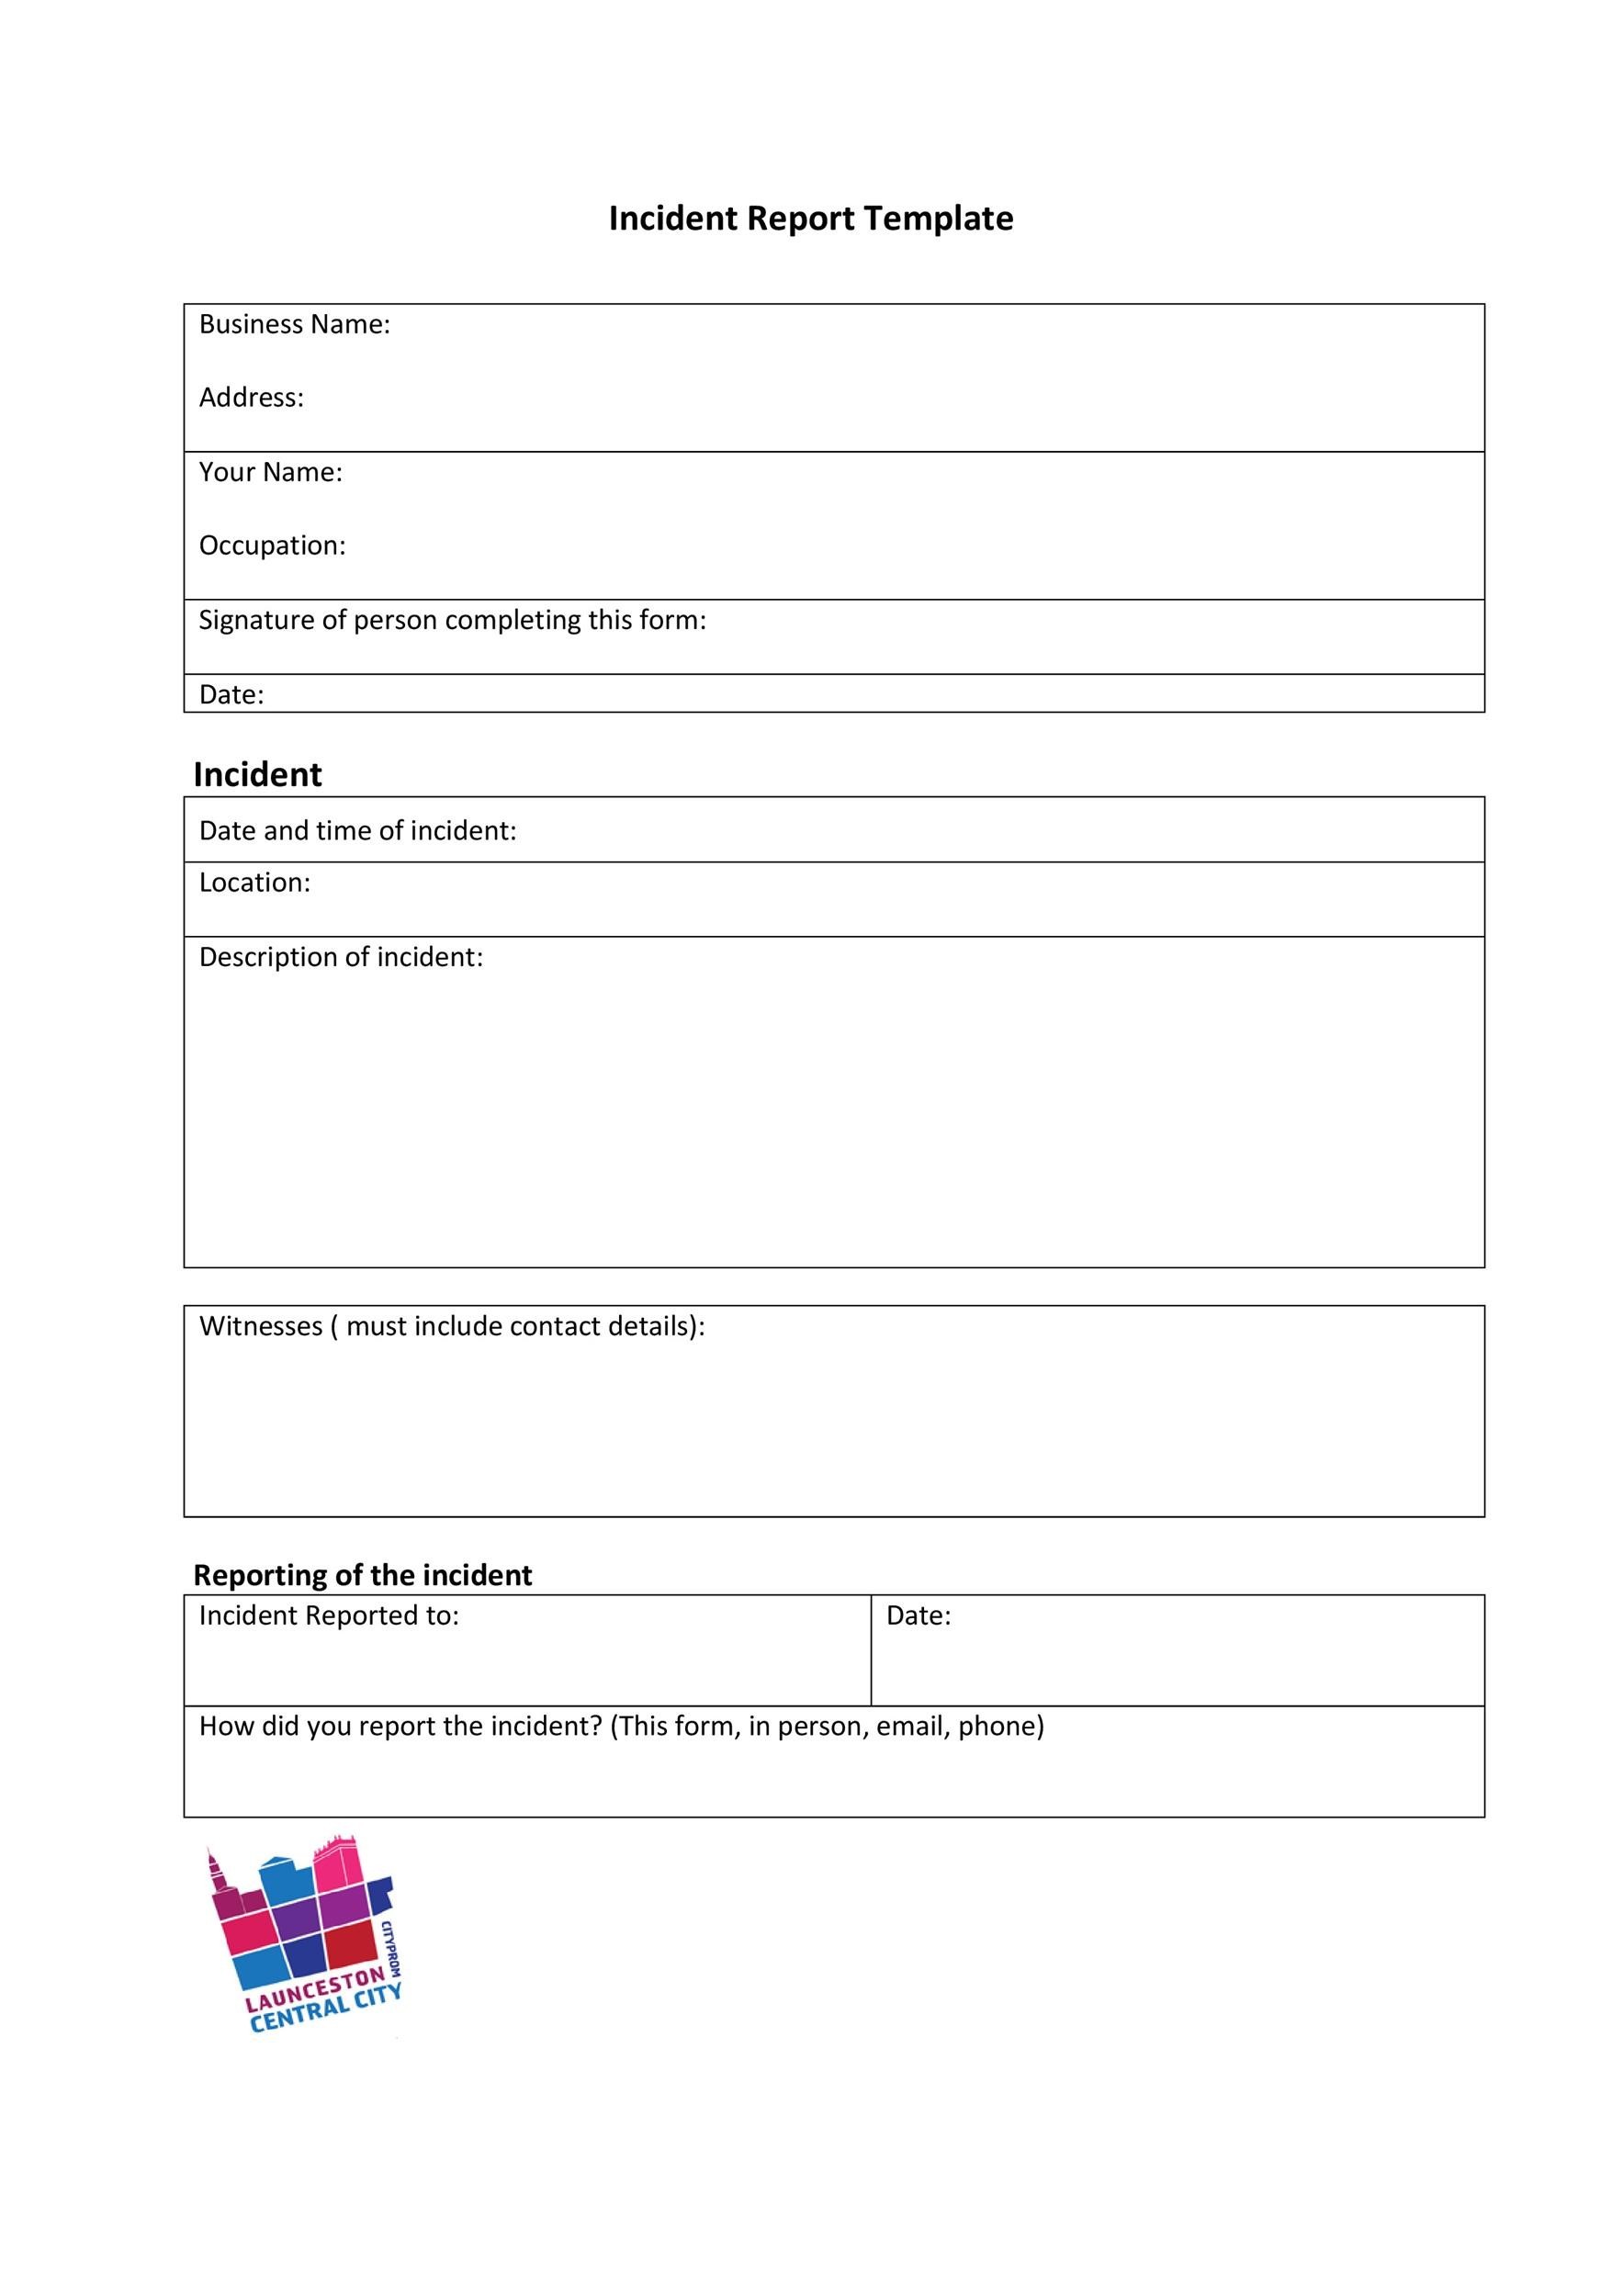 printable-incident-report-template